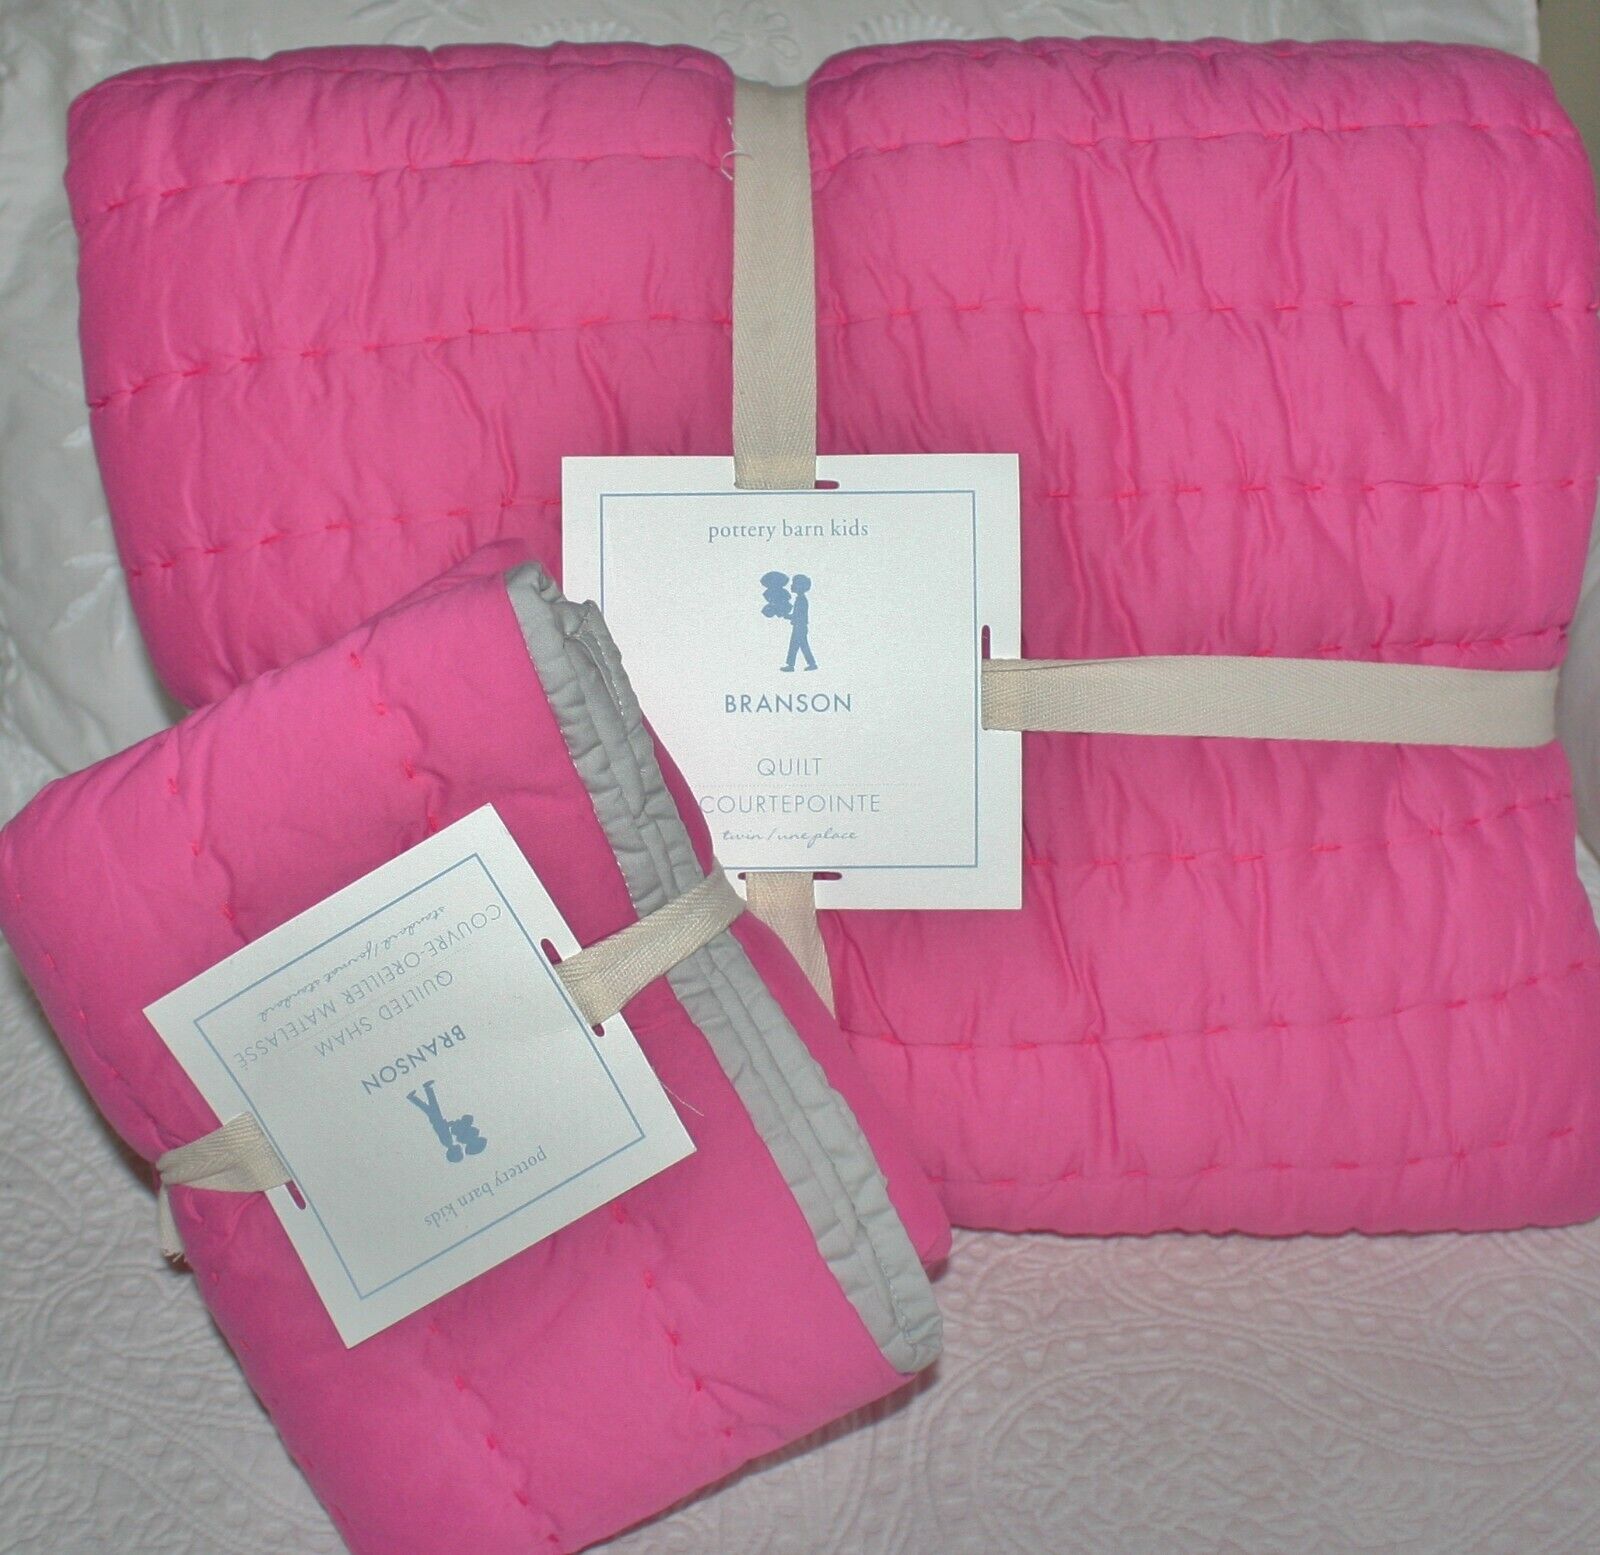 Pottery Barn Kids Branson Quilt And Sham - Twin - Hot Pink